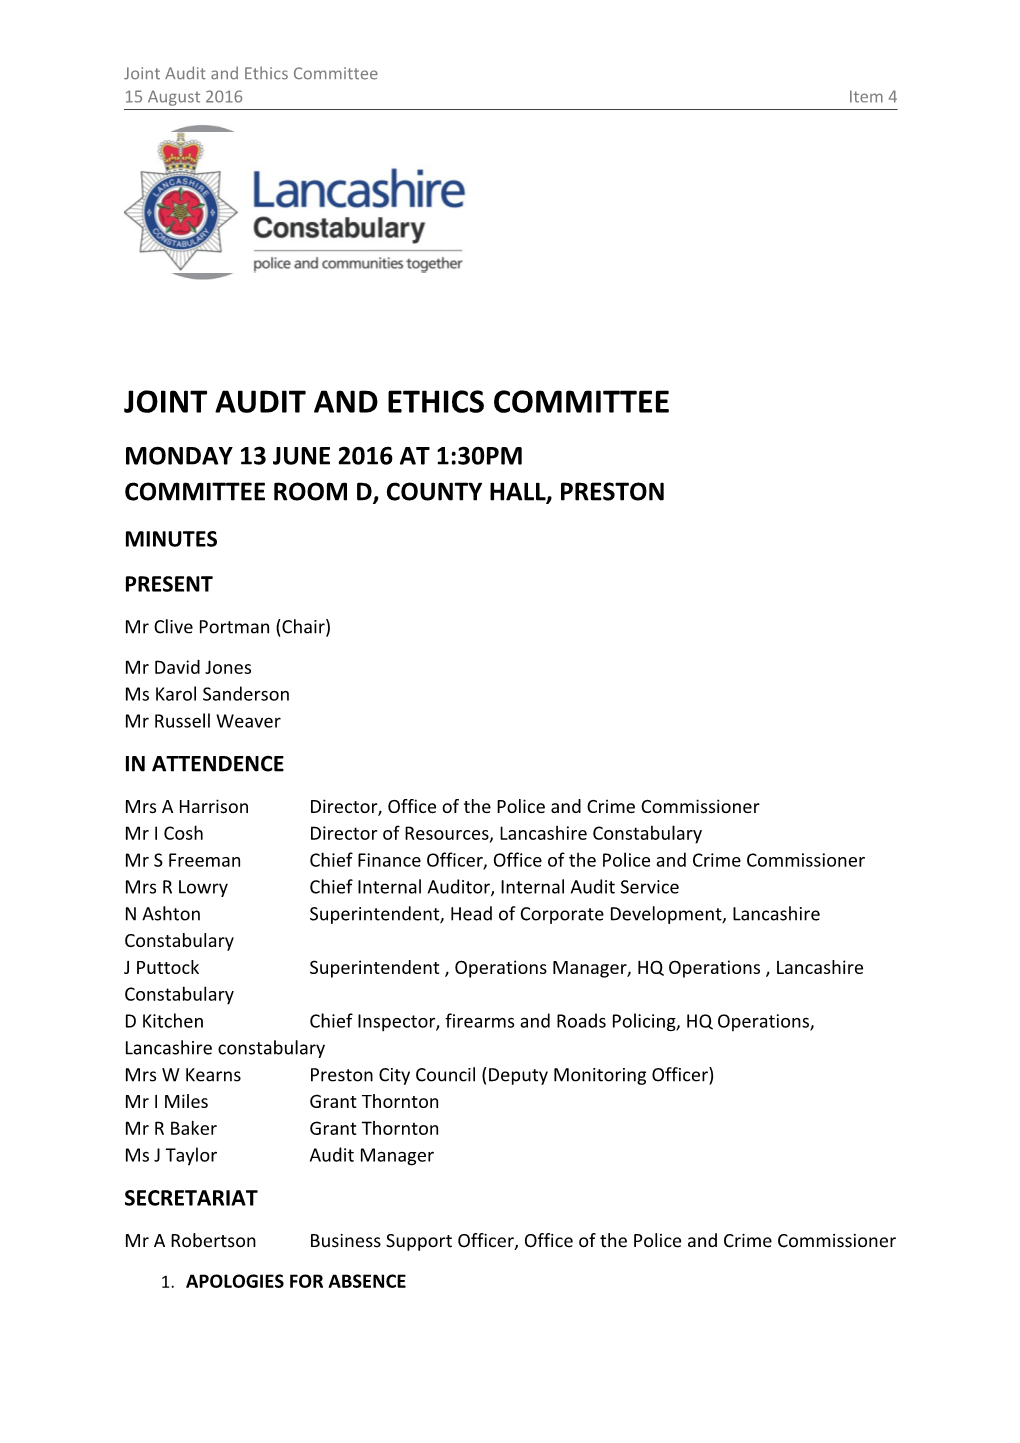 Joint Audit and Ethics Committee